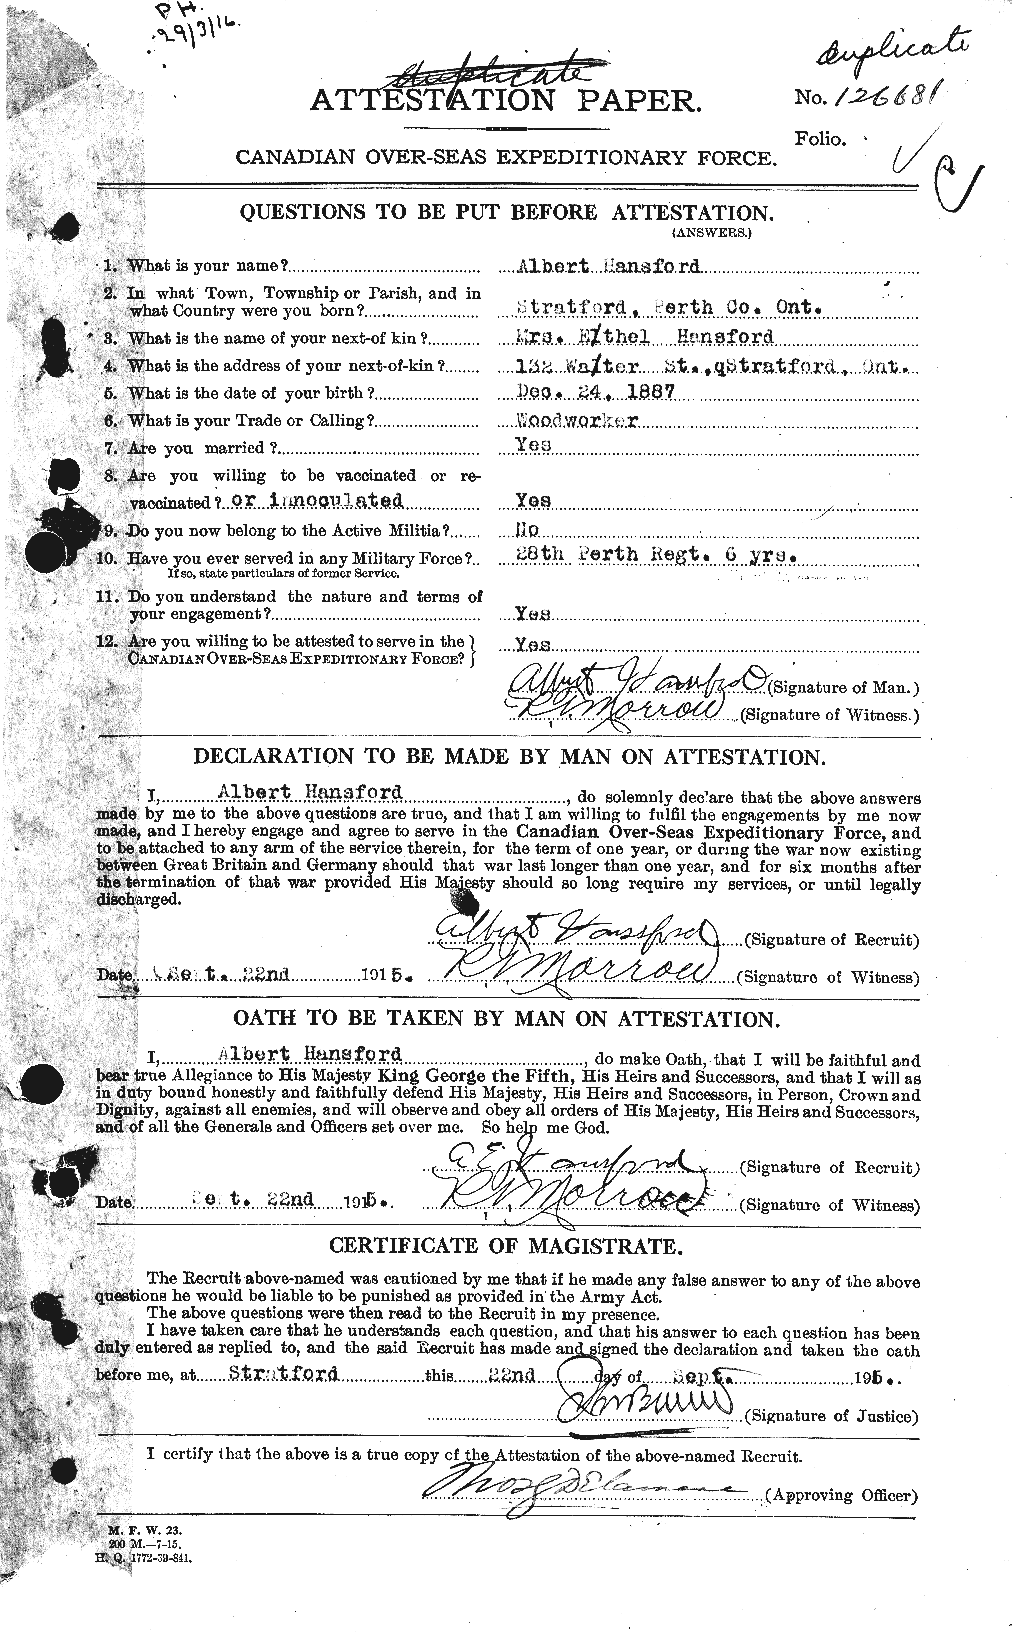 Personnel Records of the First World War - CEF 384702a